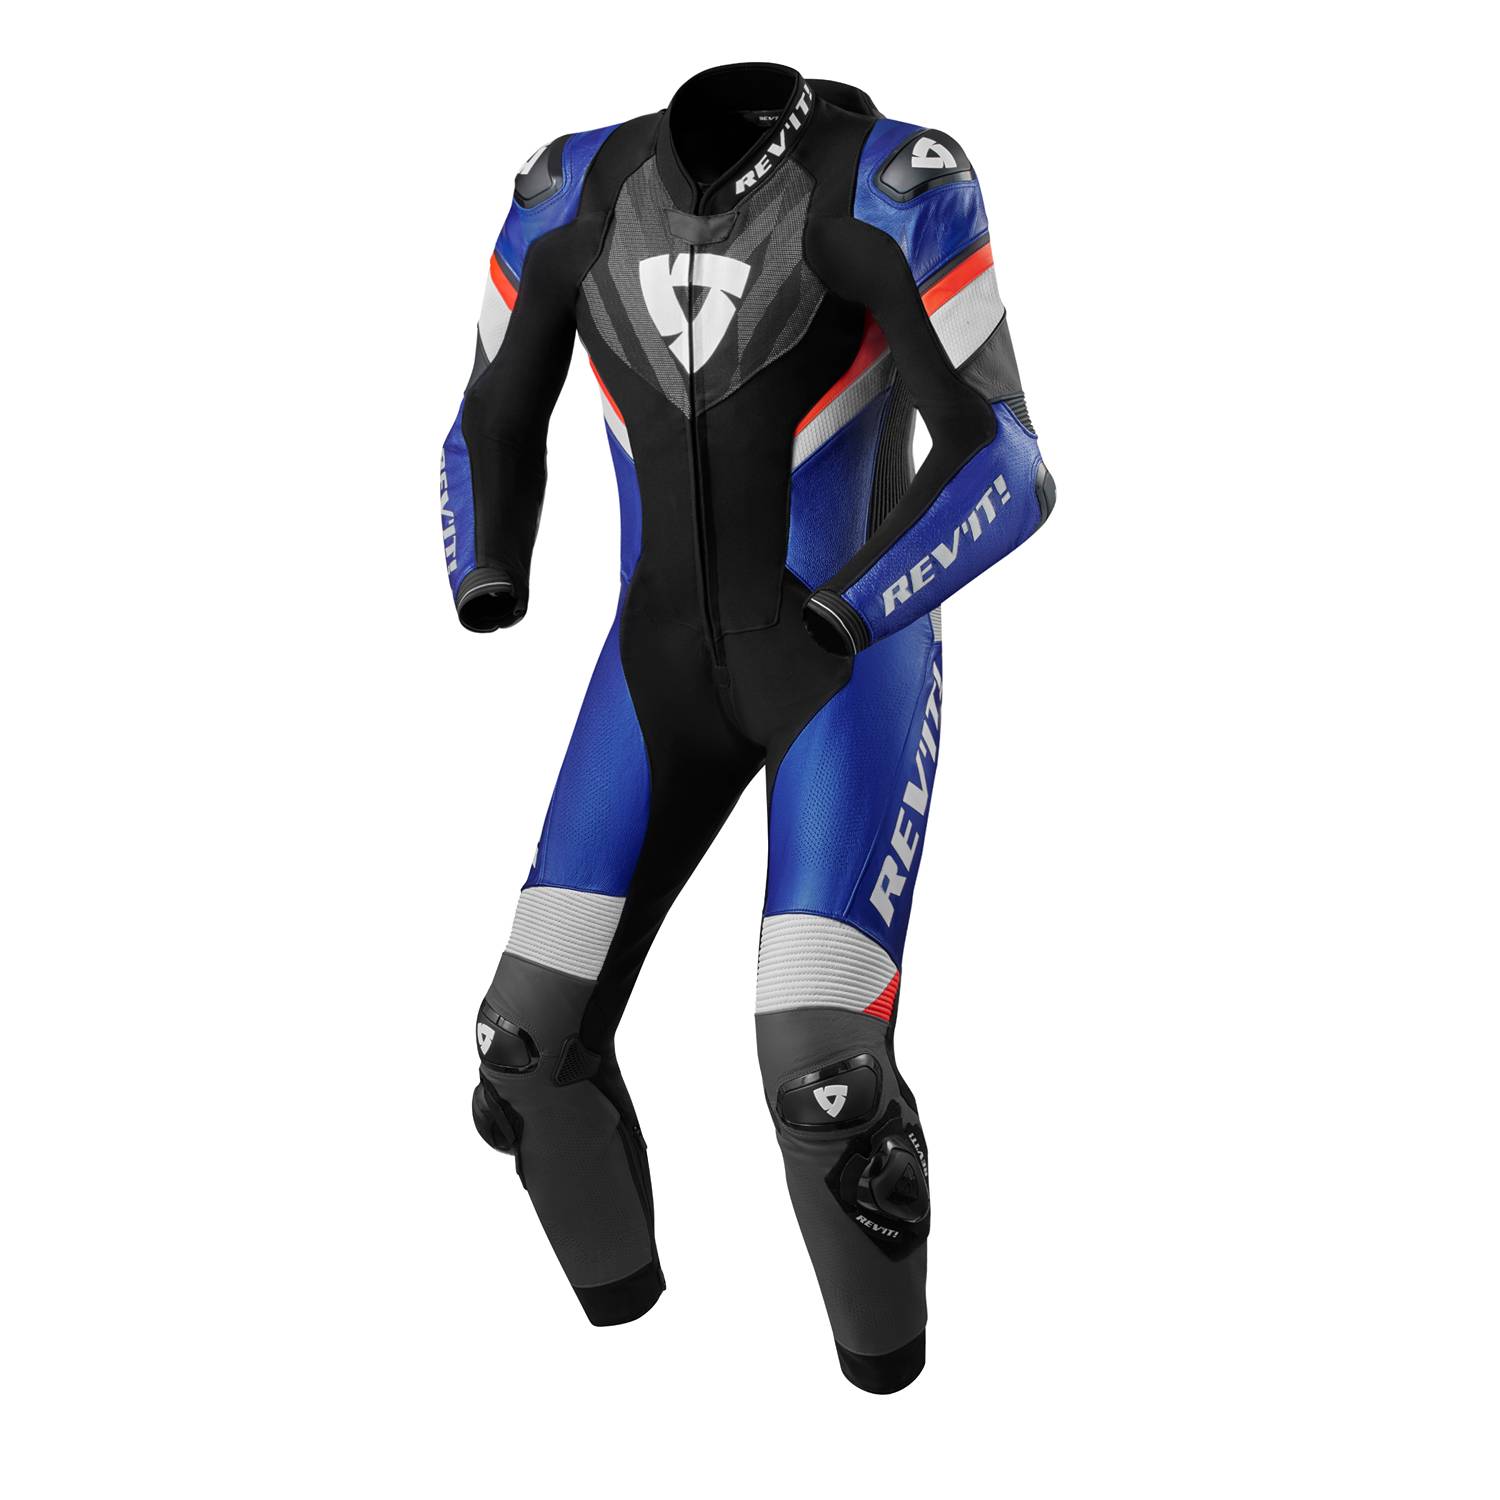 Image of REV'IT! Hyperspeed 2 One Piece Suit Black Blue Size 54 ID 8700001359757